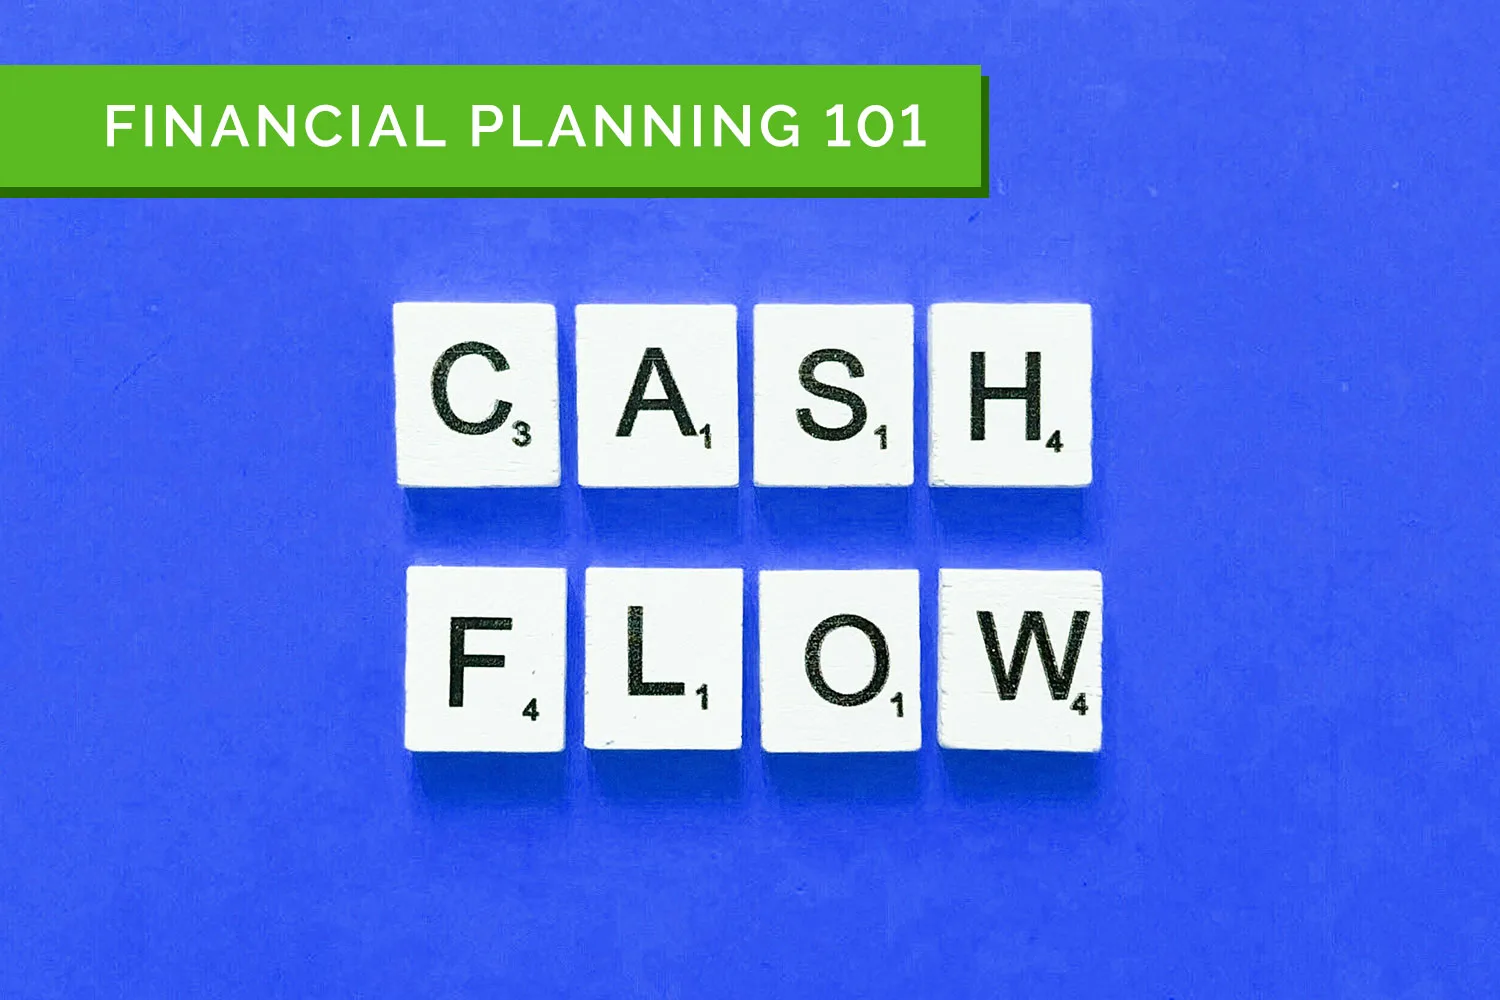 Financial planning 101: How to do a personal cash flow